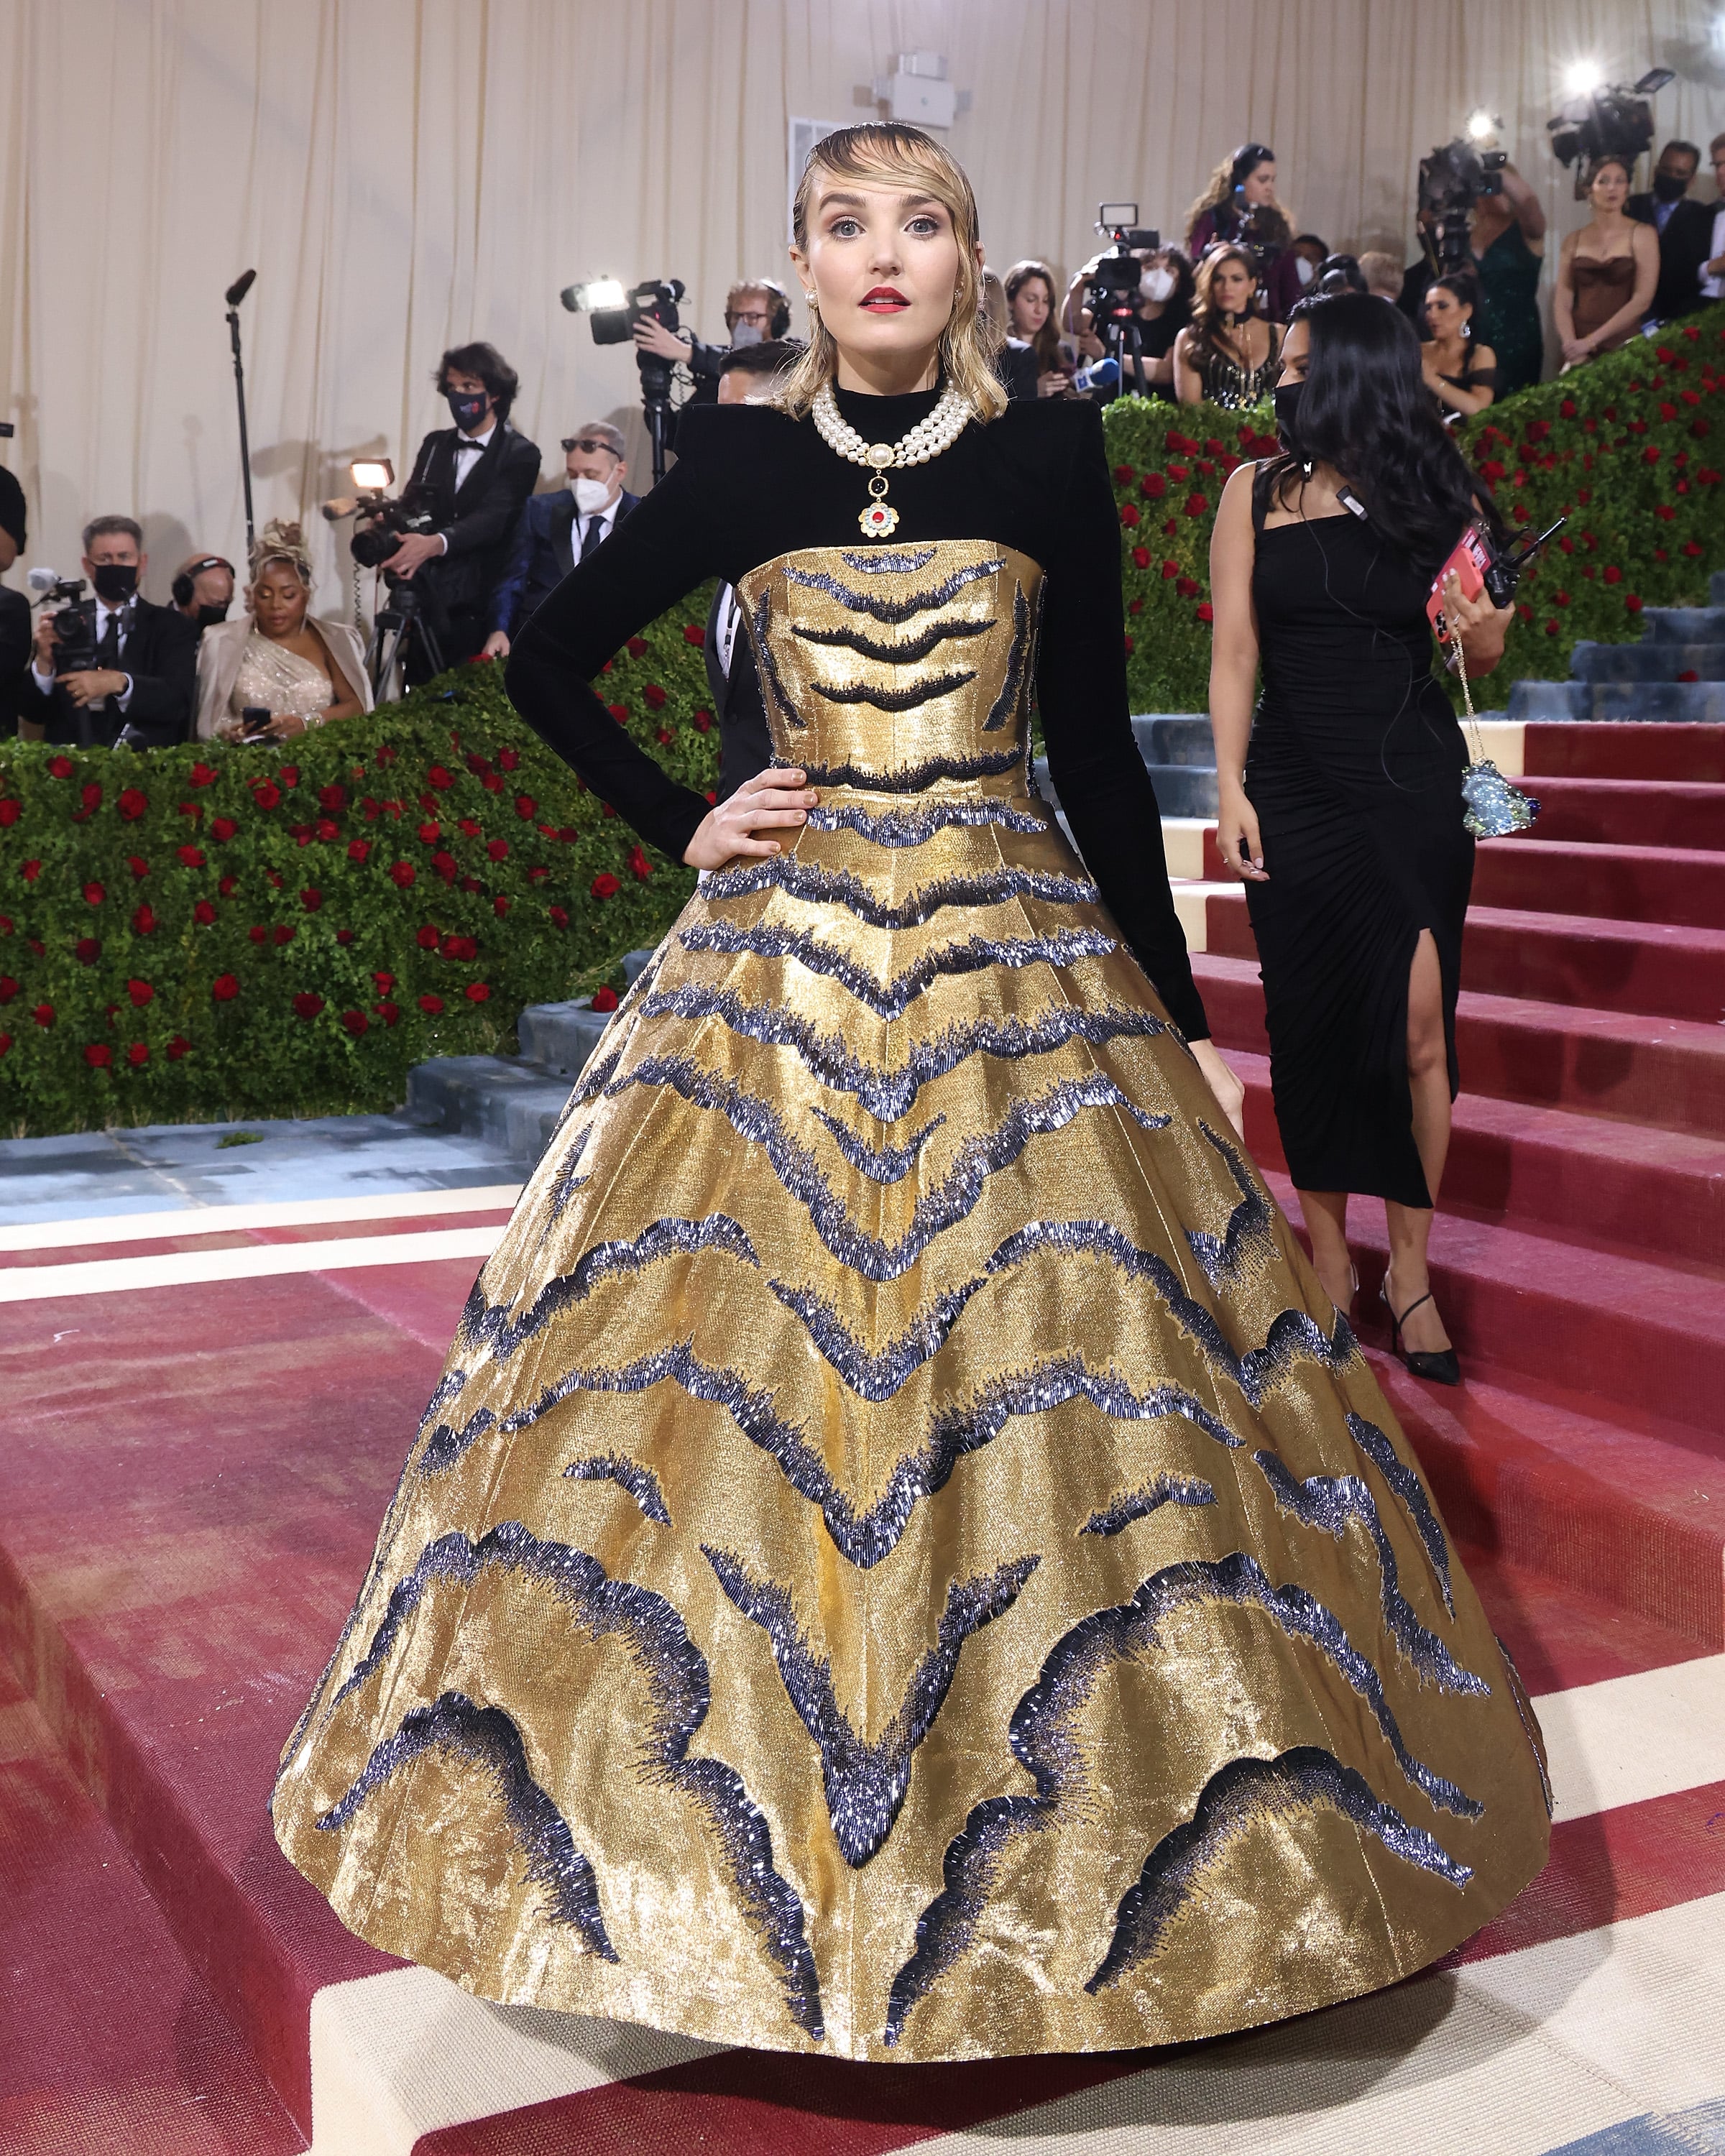 Tonight's Met Gala theme celebrates the fabulousness of the Gilded